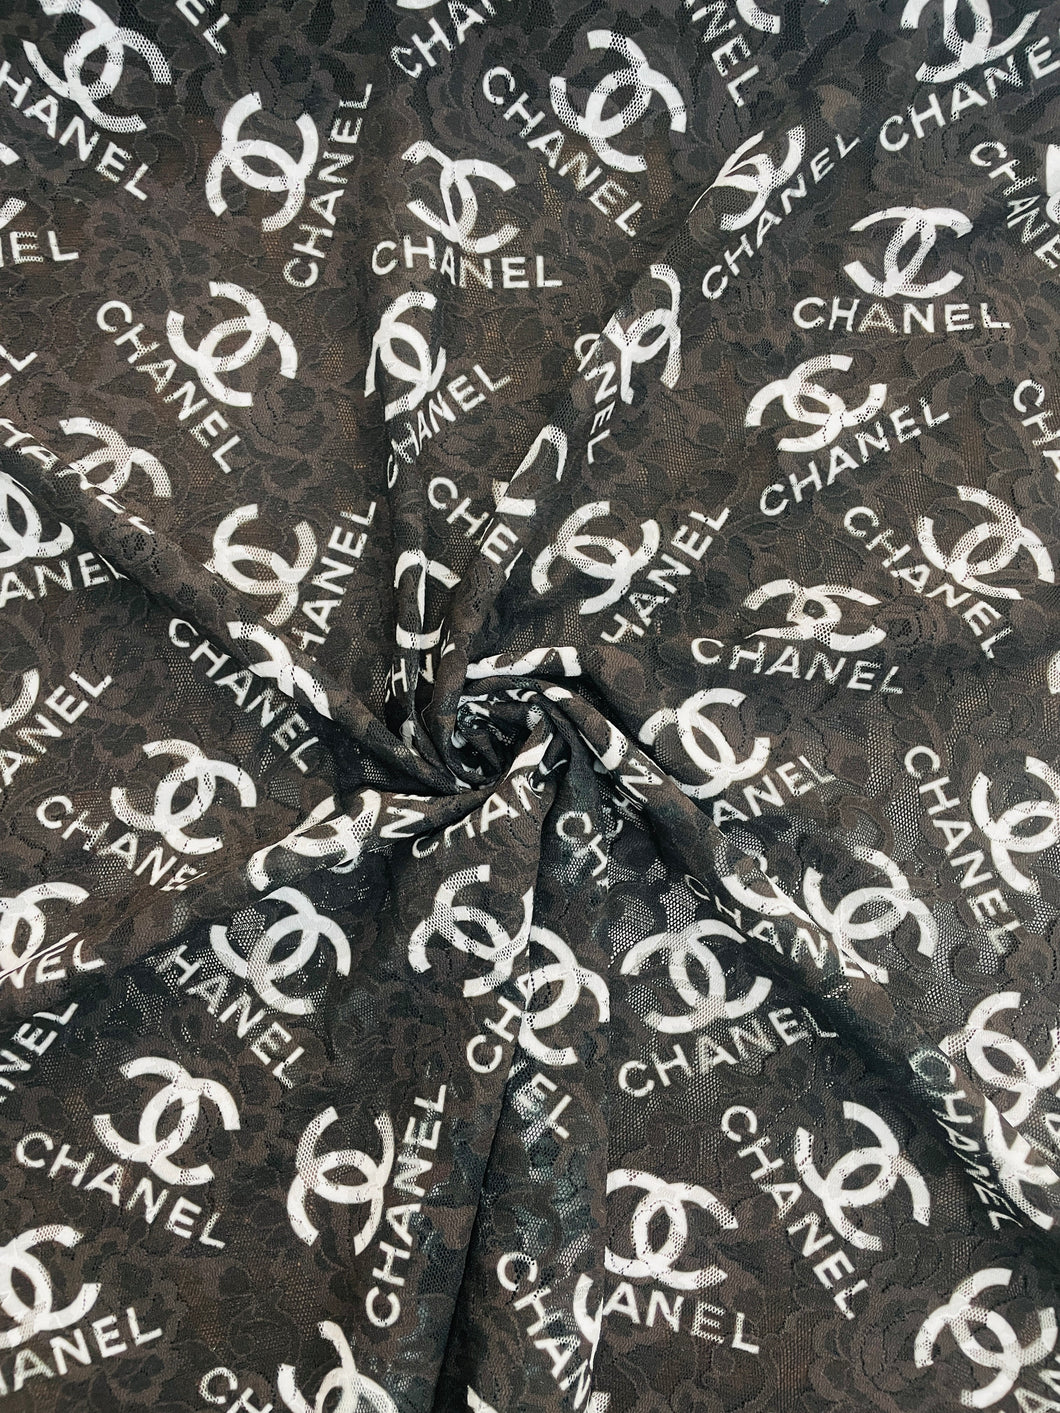 Chanel Stretch Lace in Multiple Colors